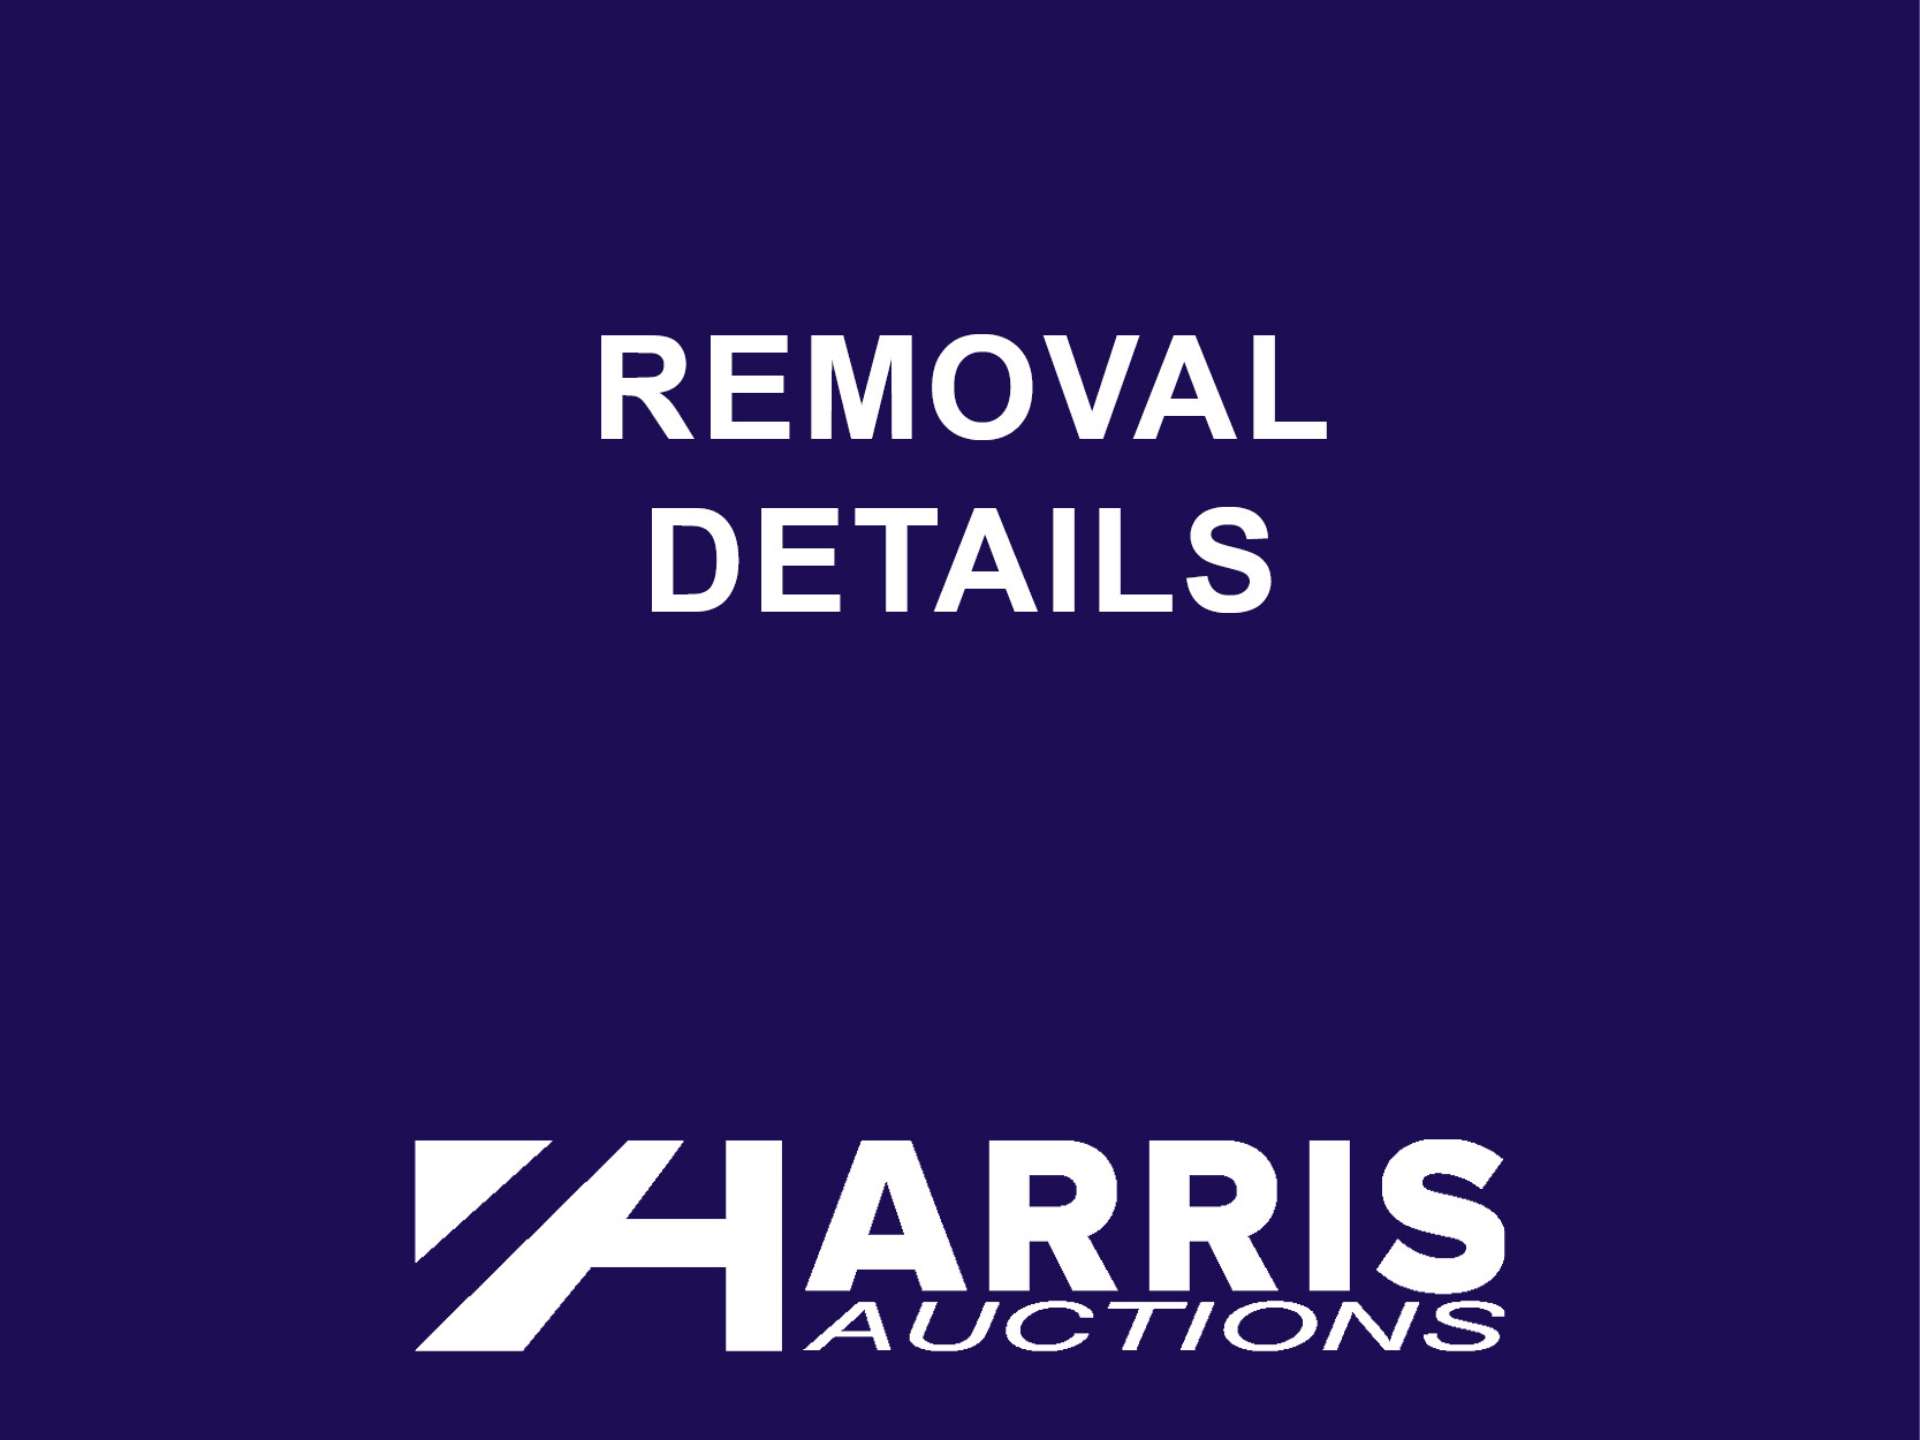 ALL ITEMS MUST BE REMOVED NO LATER THAN WEDNESDAY, FEBRUARY 28. REMOVALS BY APPOINTMENT ONLY.